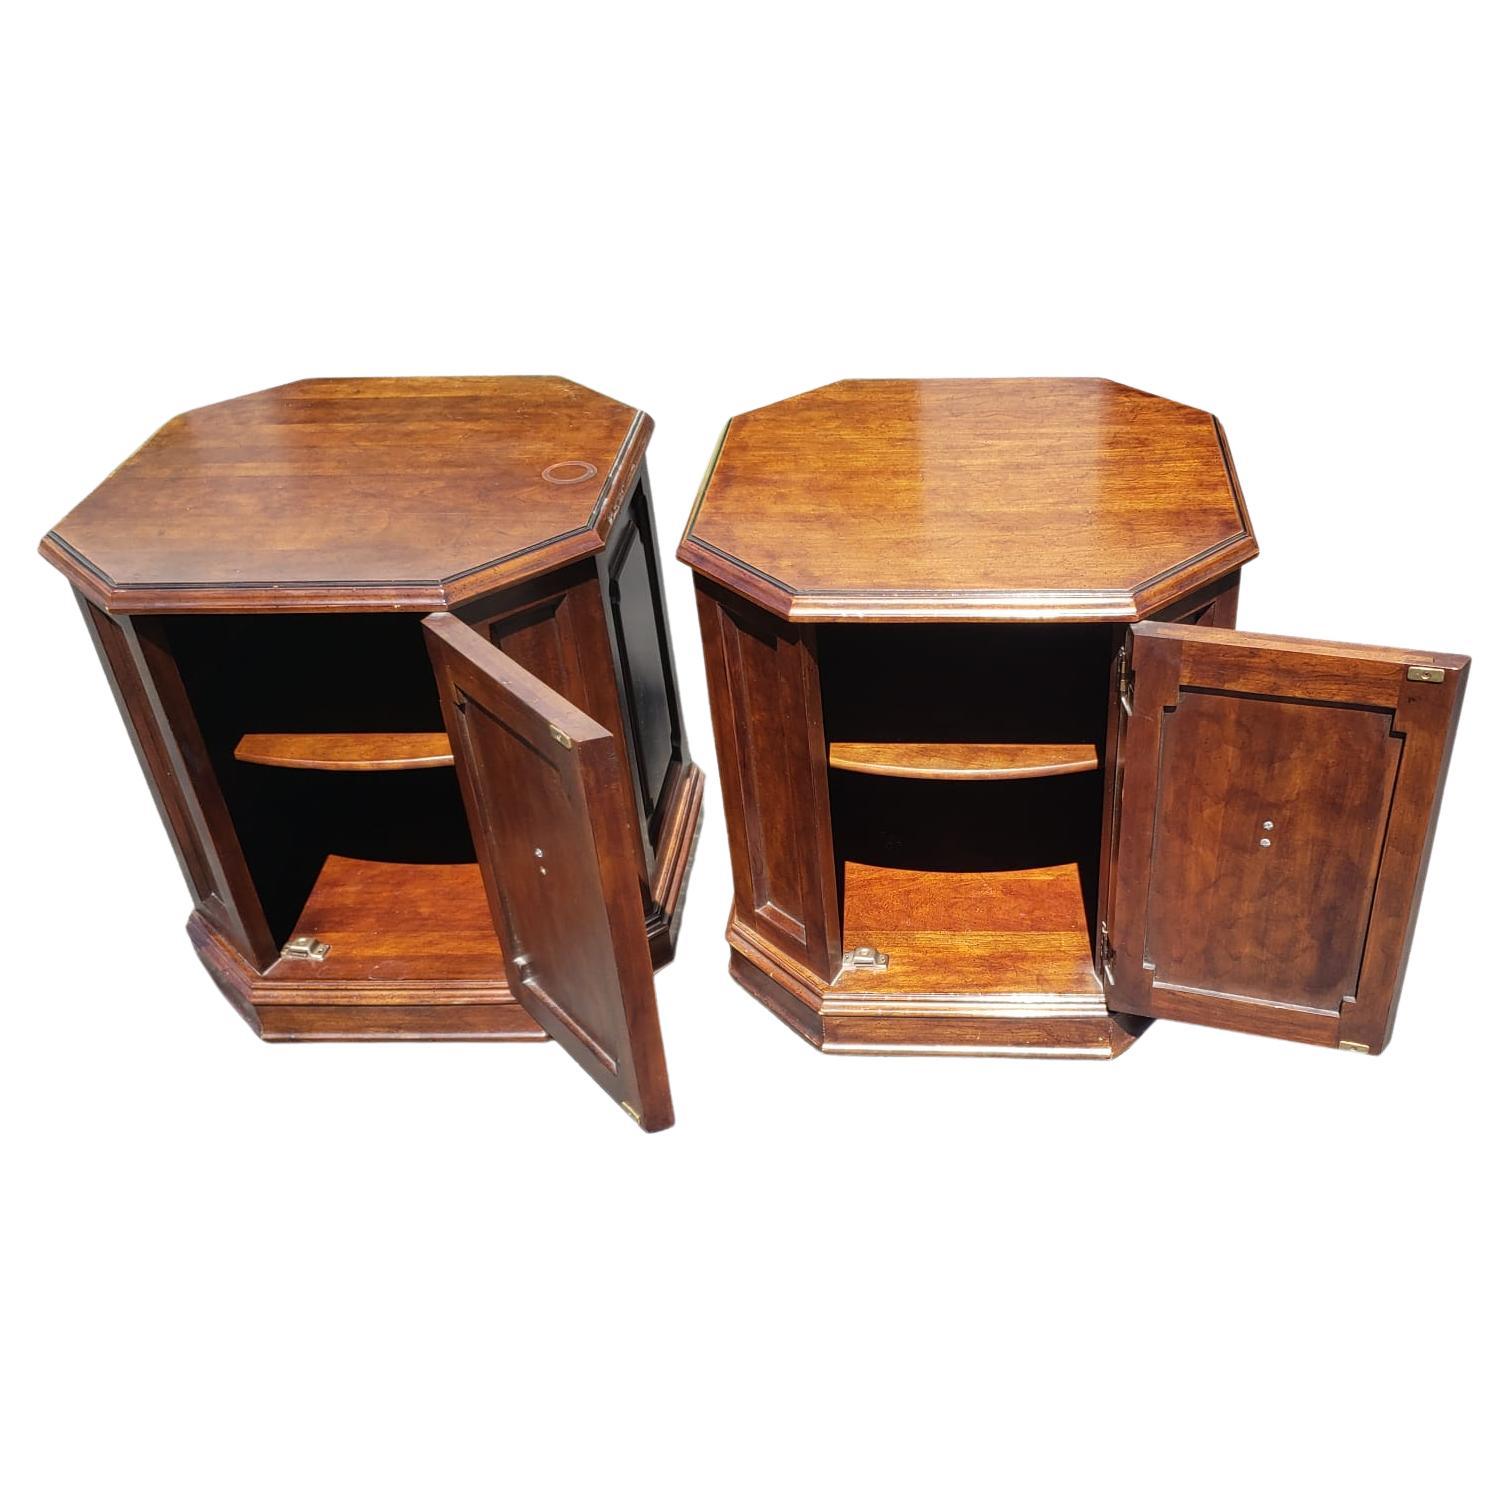 Pair of Davis Cabinet Co. Cherry Octogonal Commodes or Side Tables In Good Condition For Sale In Germantown, MD